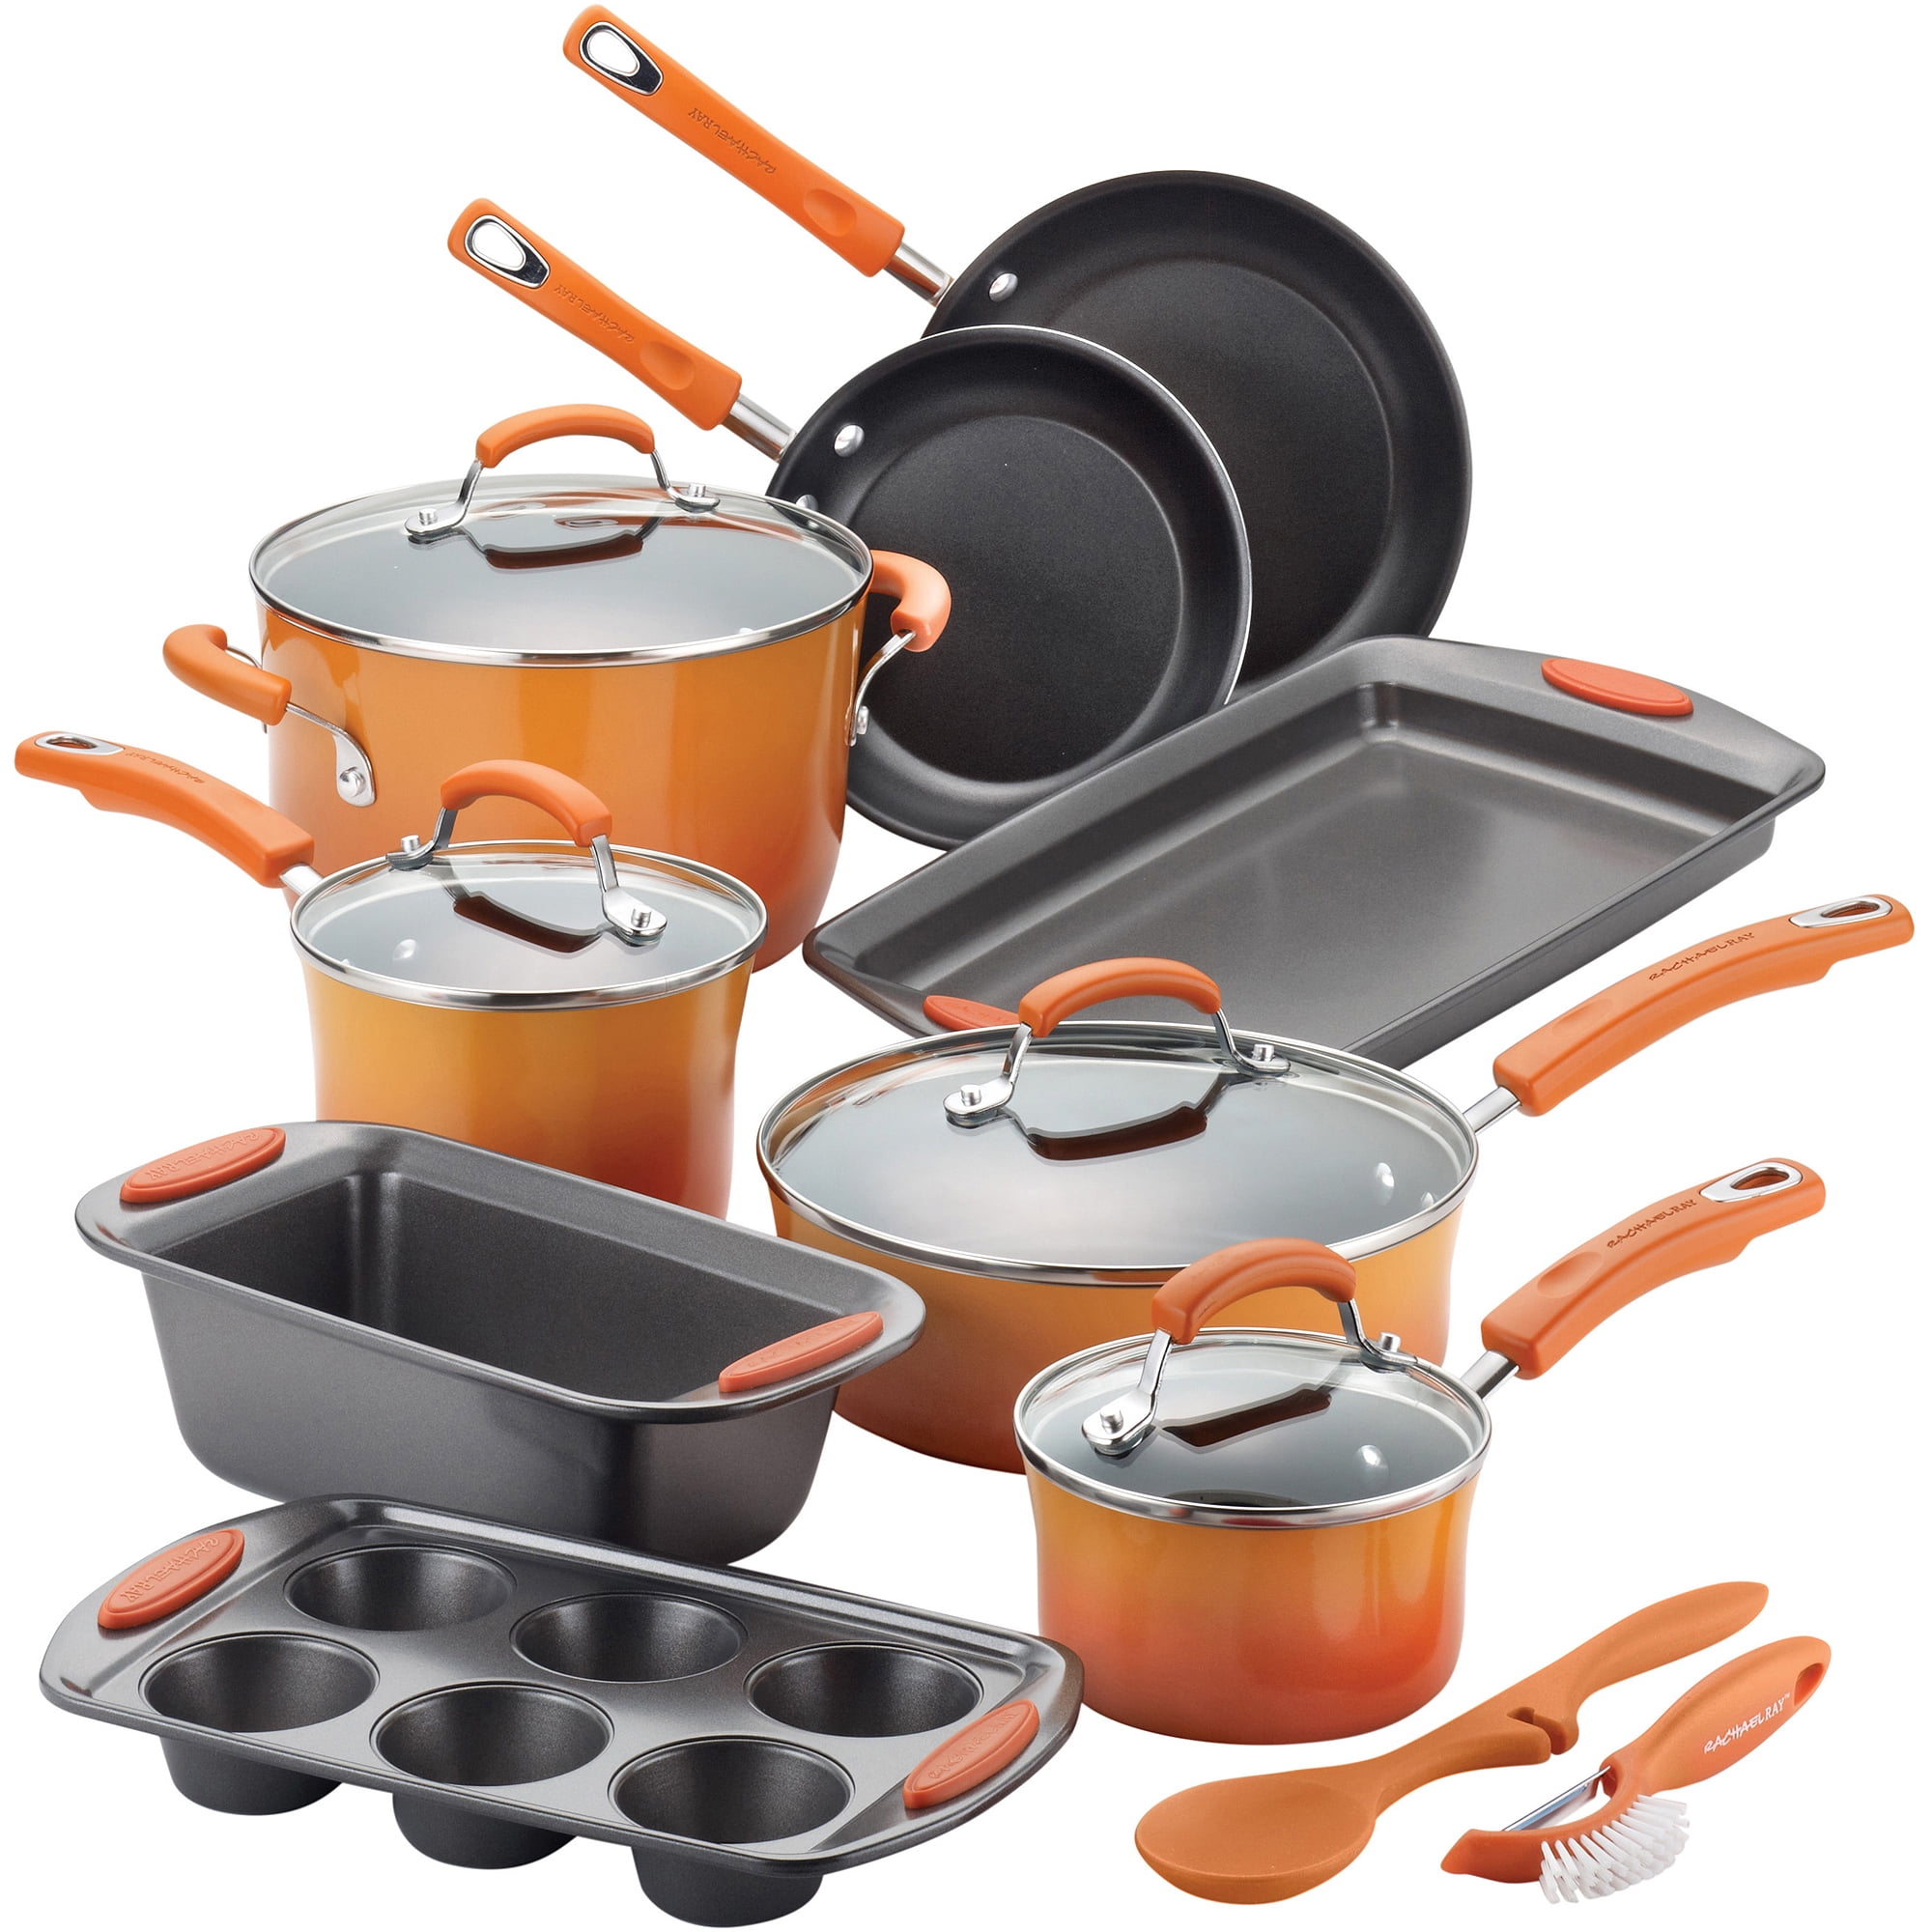 Rachael Ray Cucina Oven-To-Table Hard Enamel Nonstick 2-1/2-quart Covered  Round Casserole - Bed Bath & Beyond - 9216695